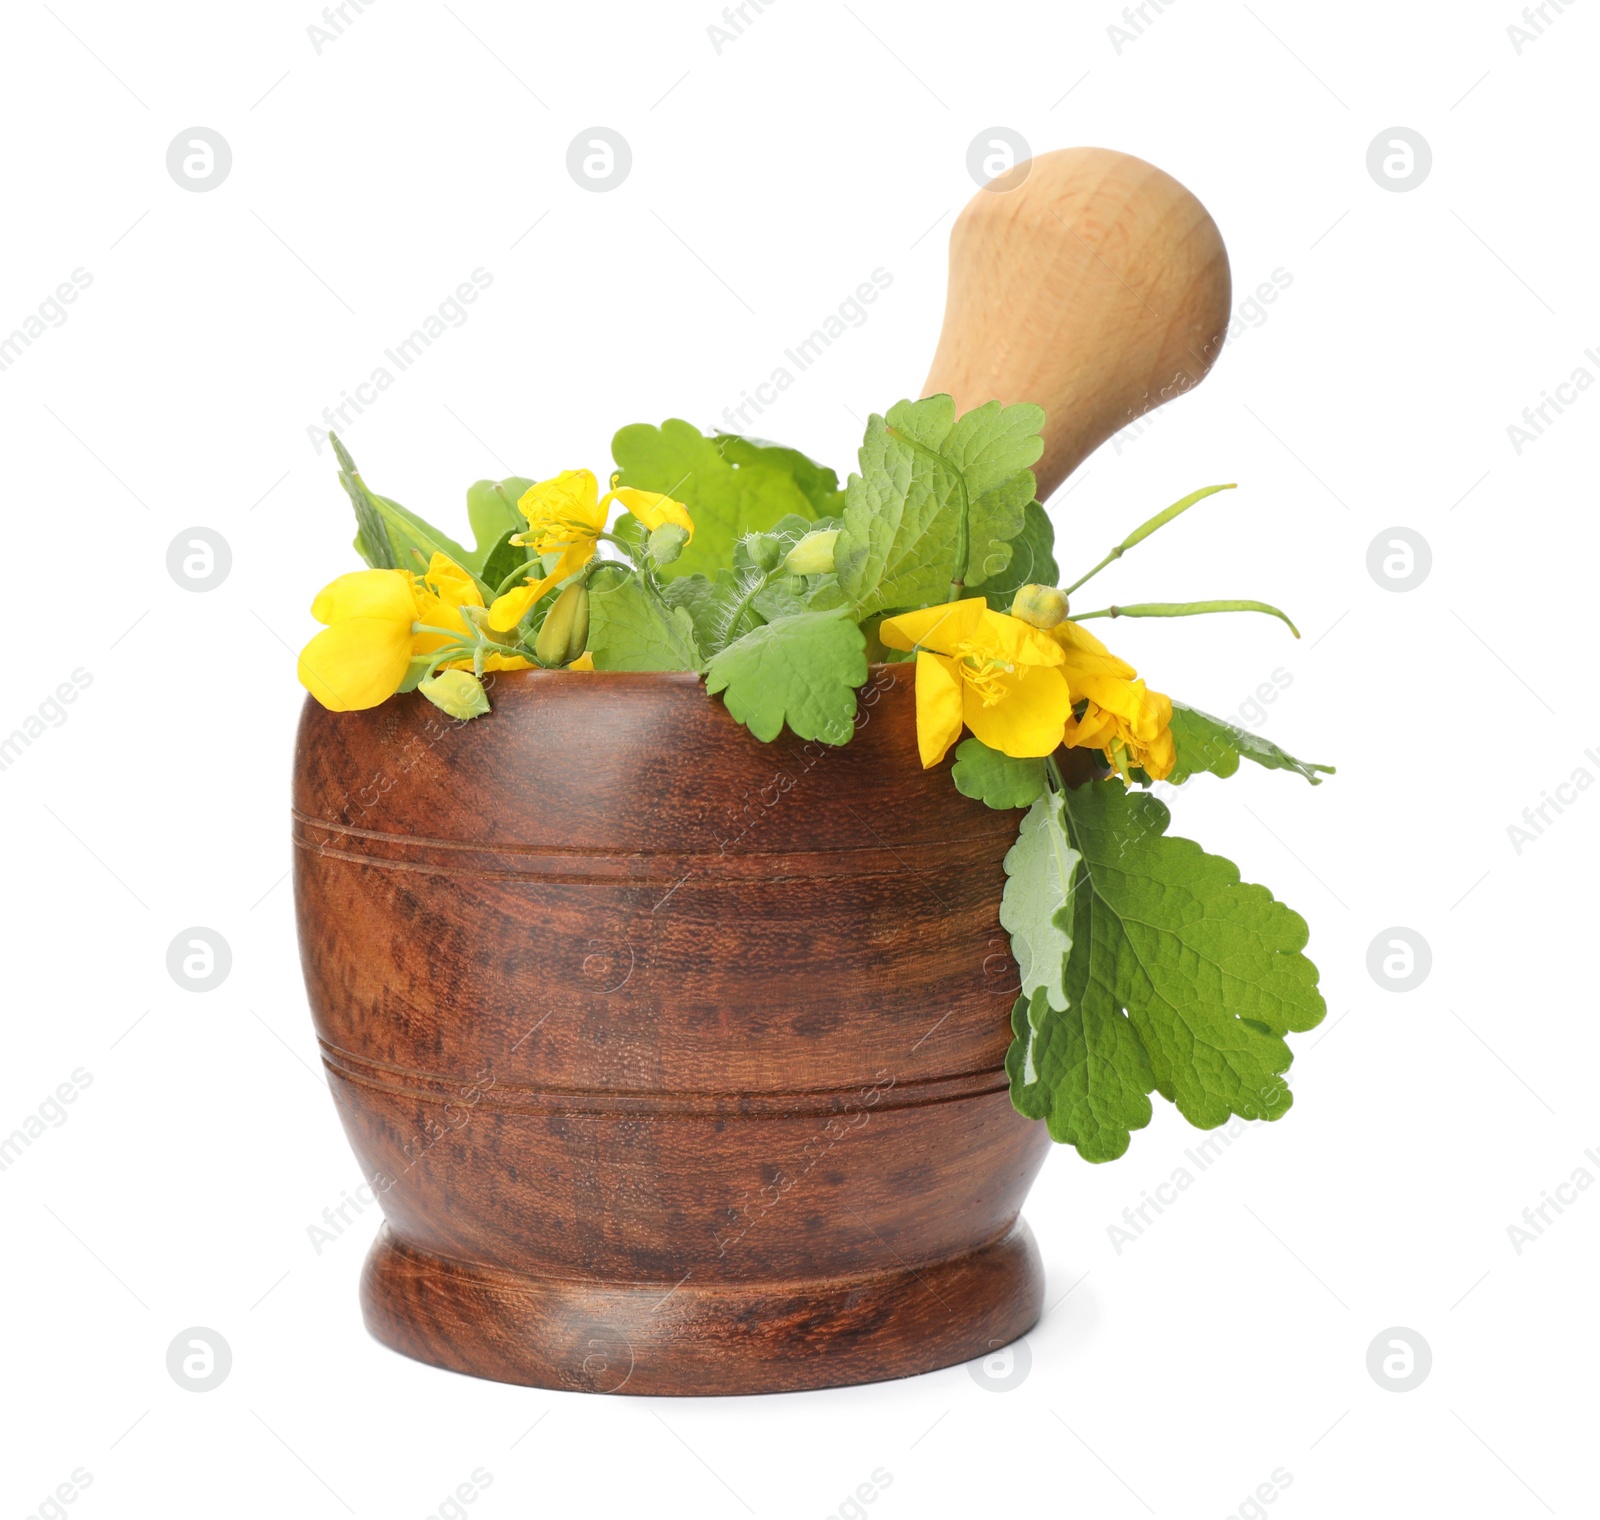 Photo of Celandine with pestle in wooden mortar isolated on white